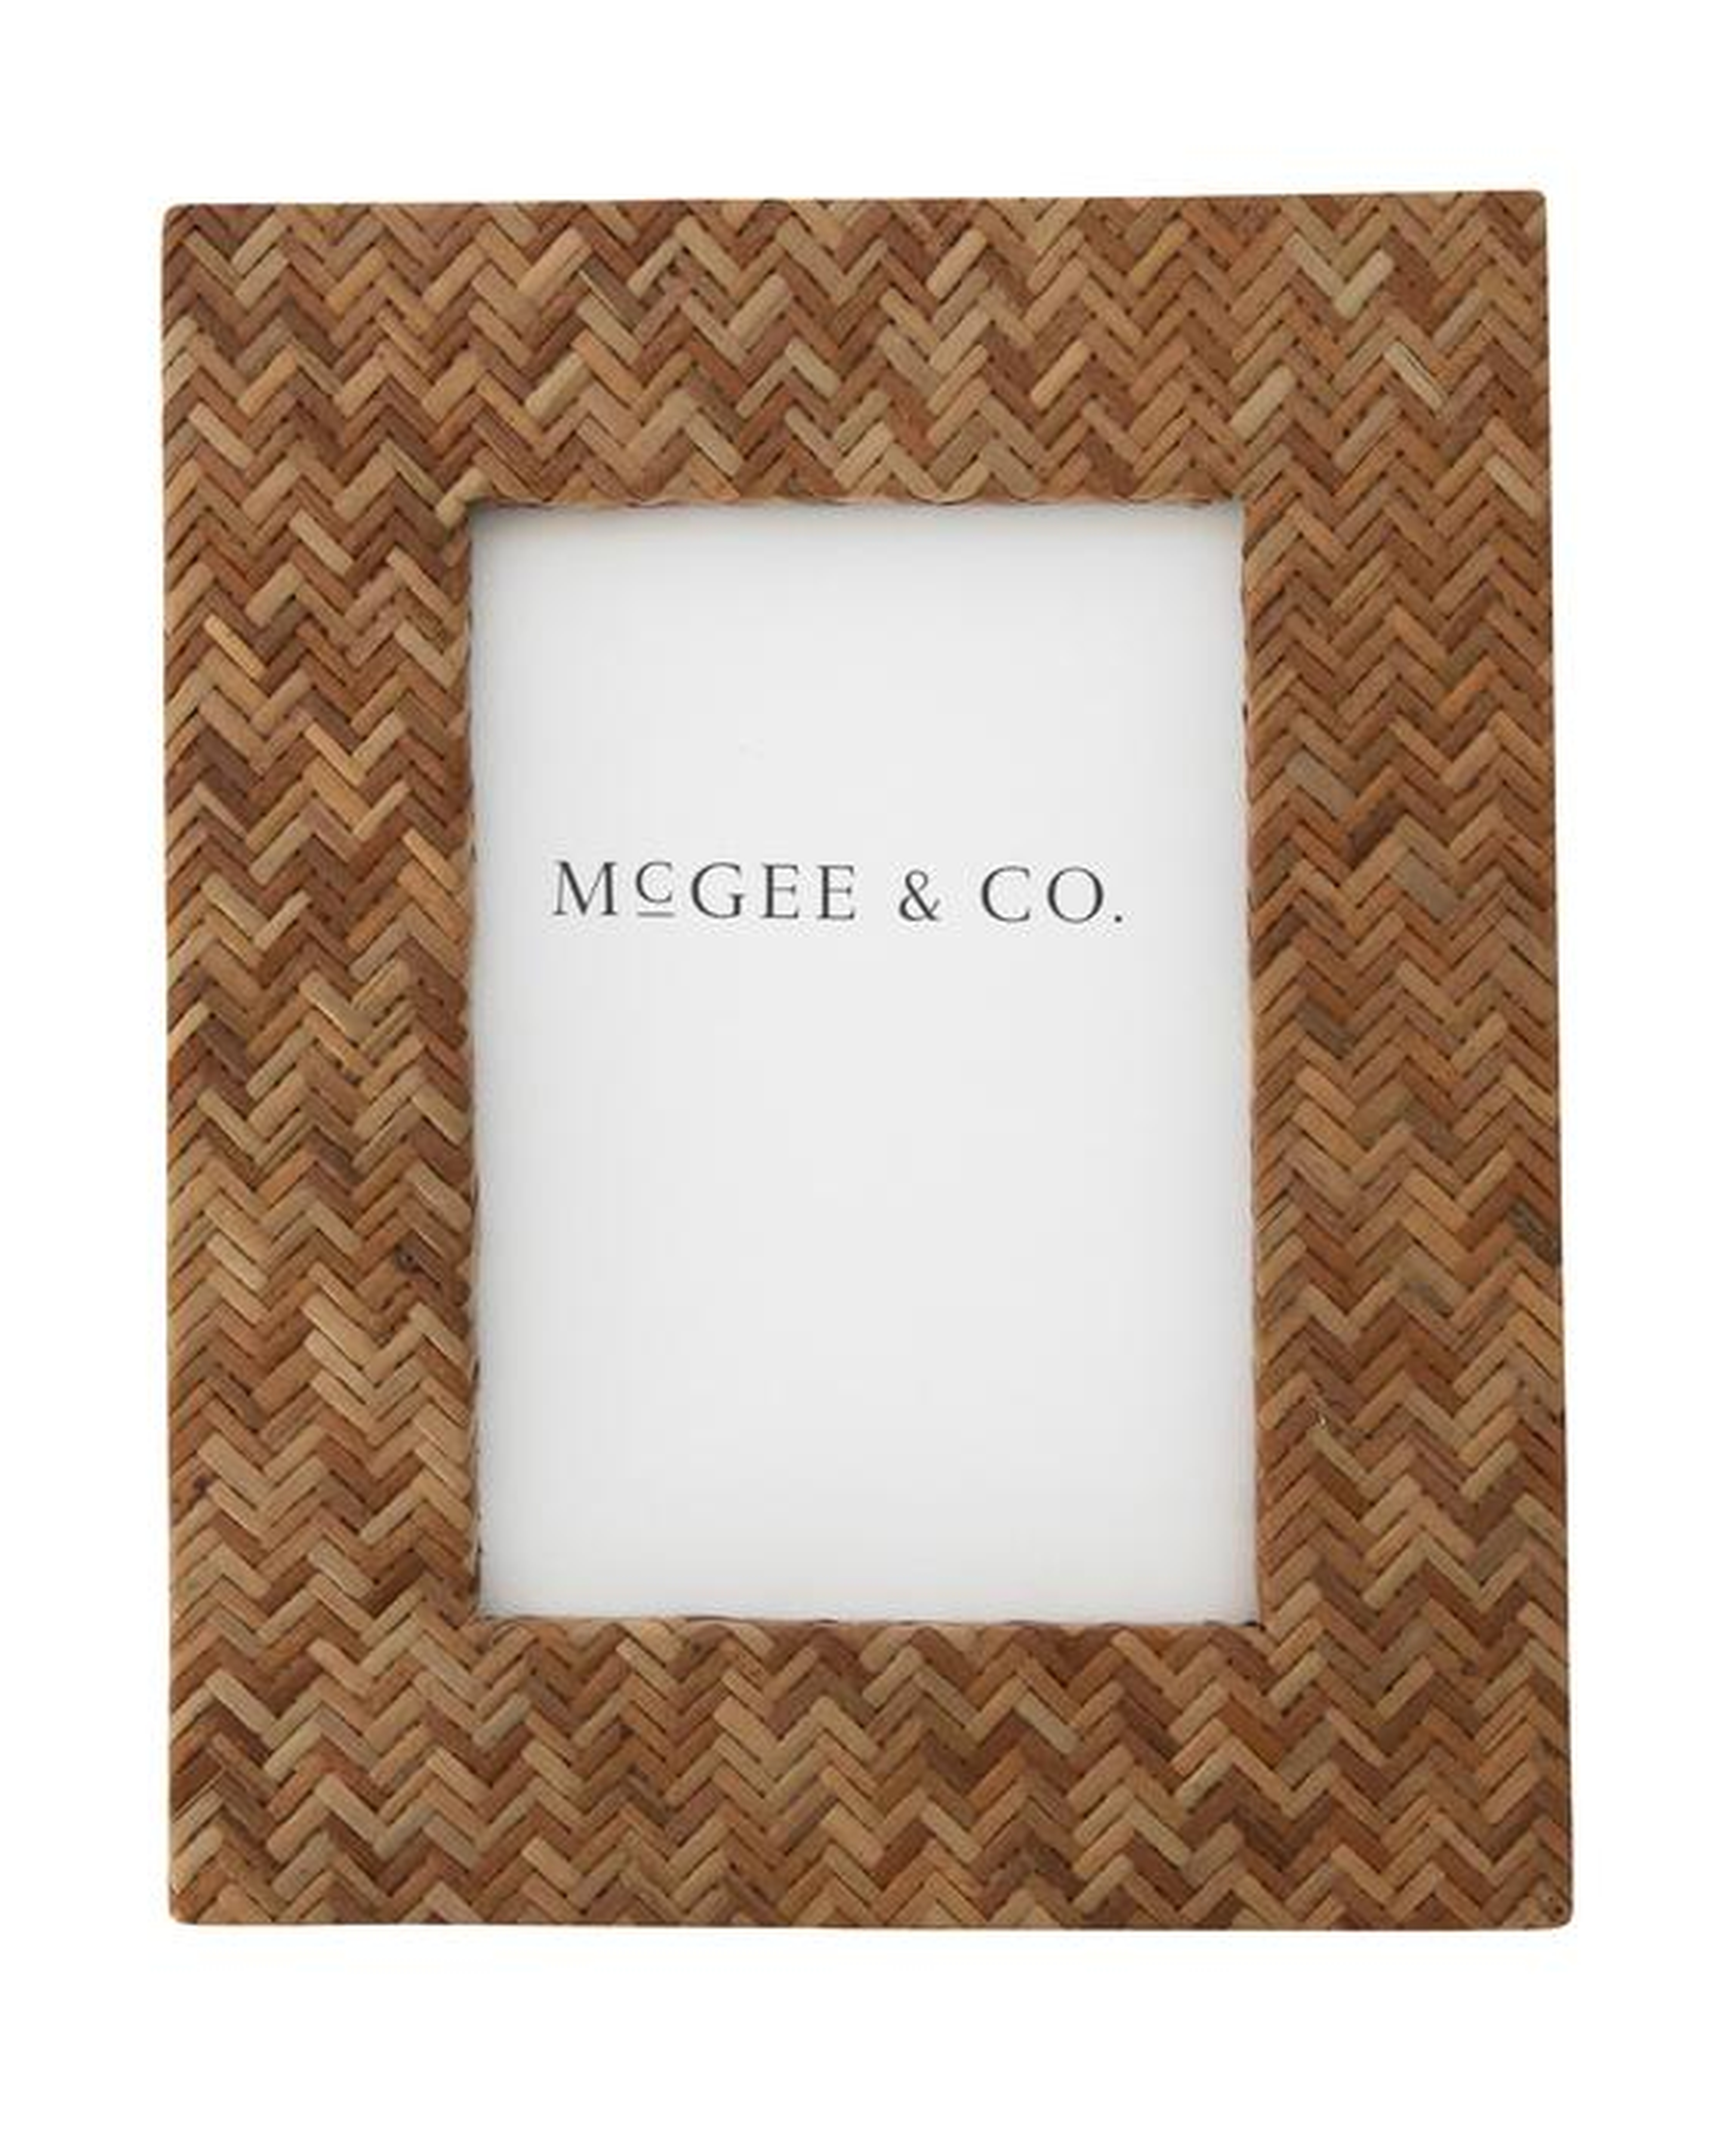 Double Weave Frame, Small - McGee & Co.